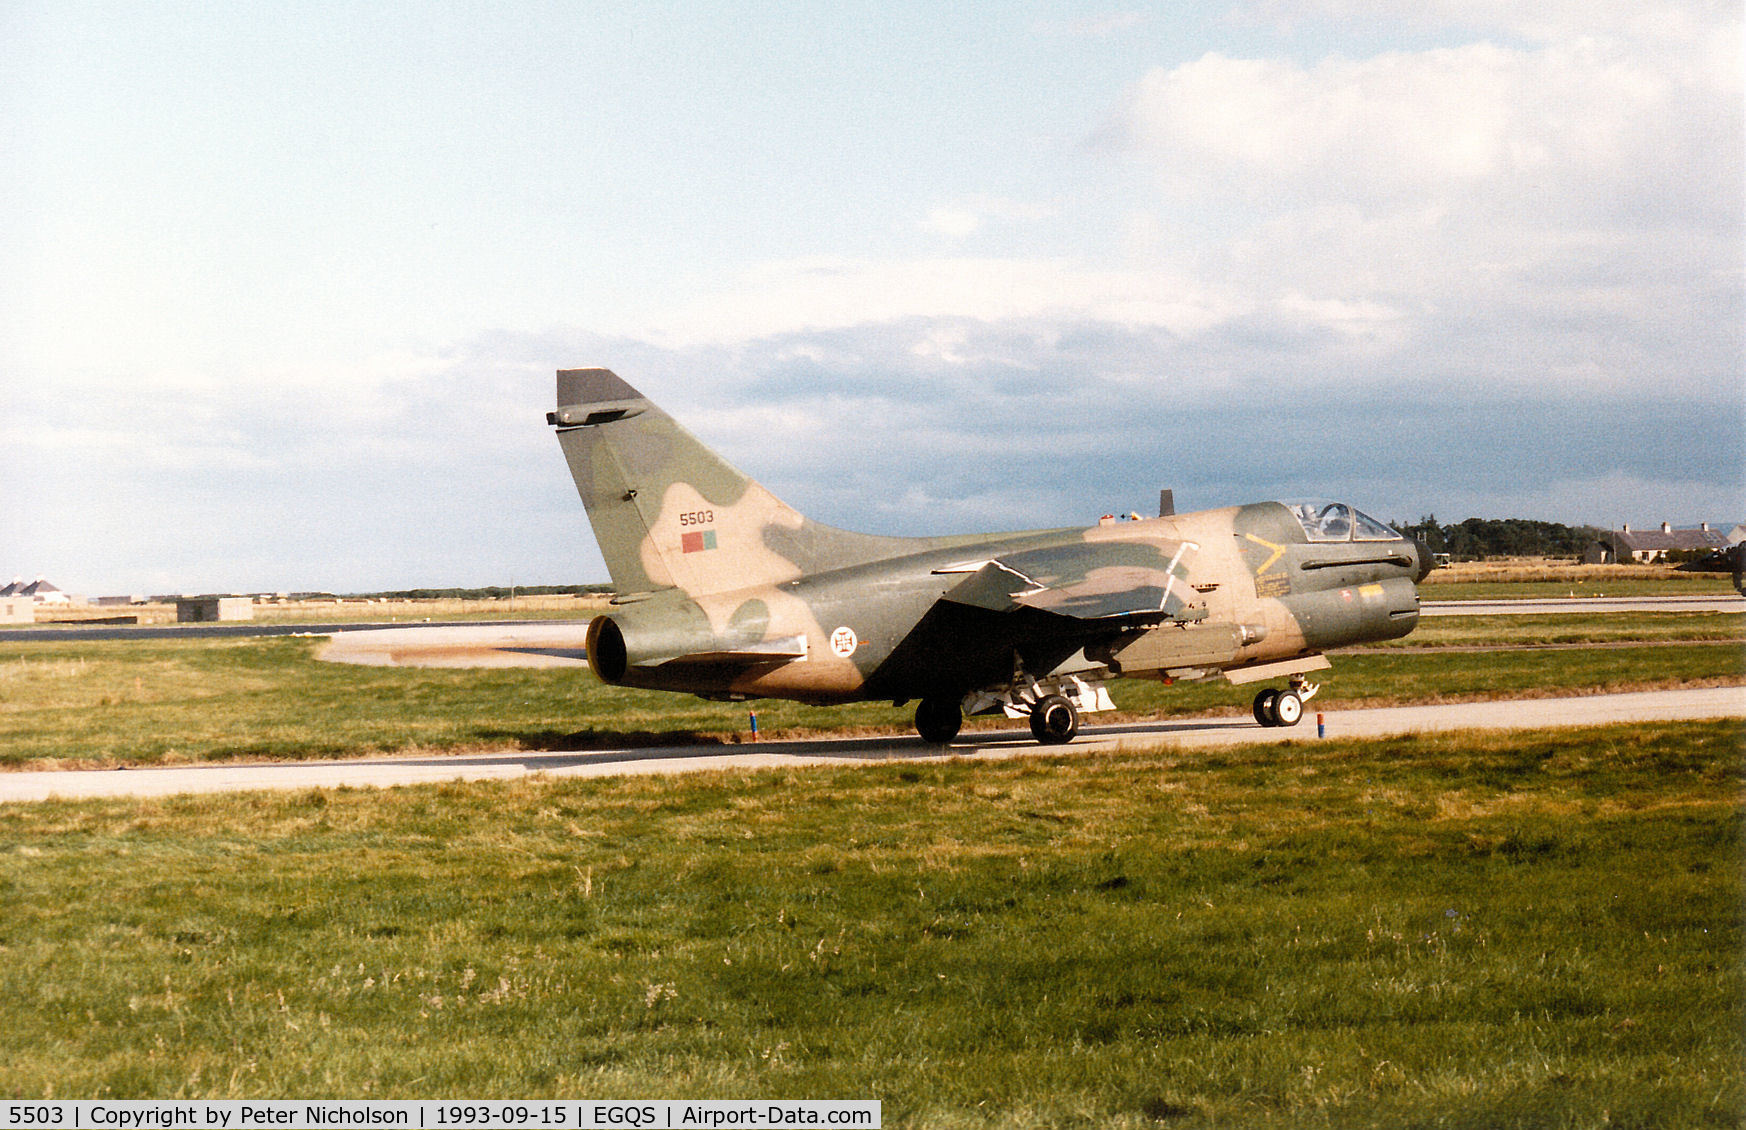 5503, LTV A-7P Corsair II C/N A-182/P-003, Portuguese Air Force A-7P Corsair II of 304 Esquadron taxying to Runway 05 at RAF Lossiemouth in September 1993.